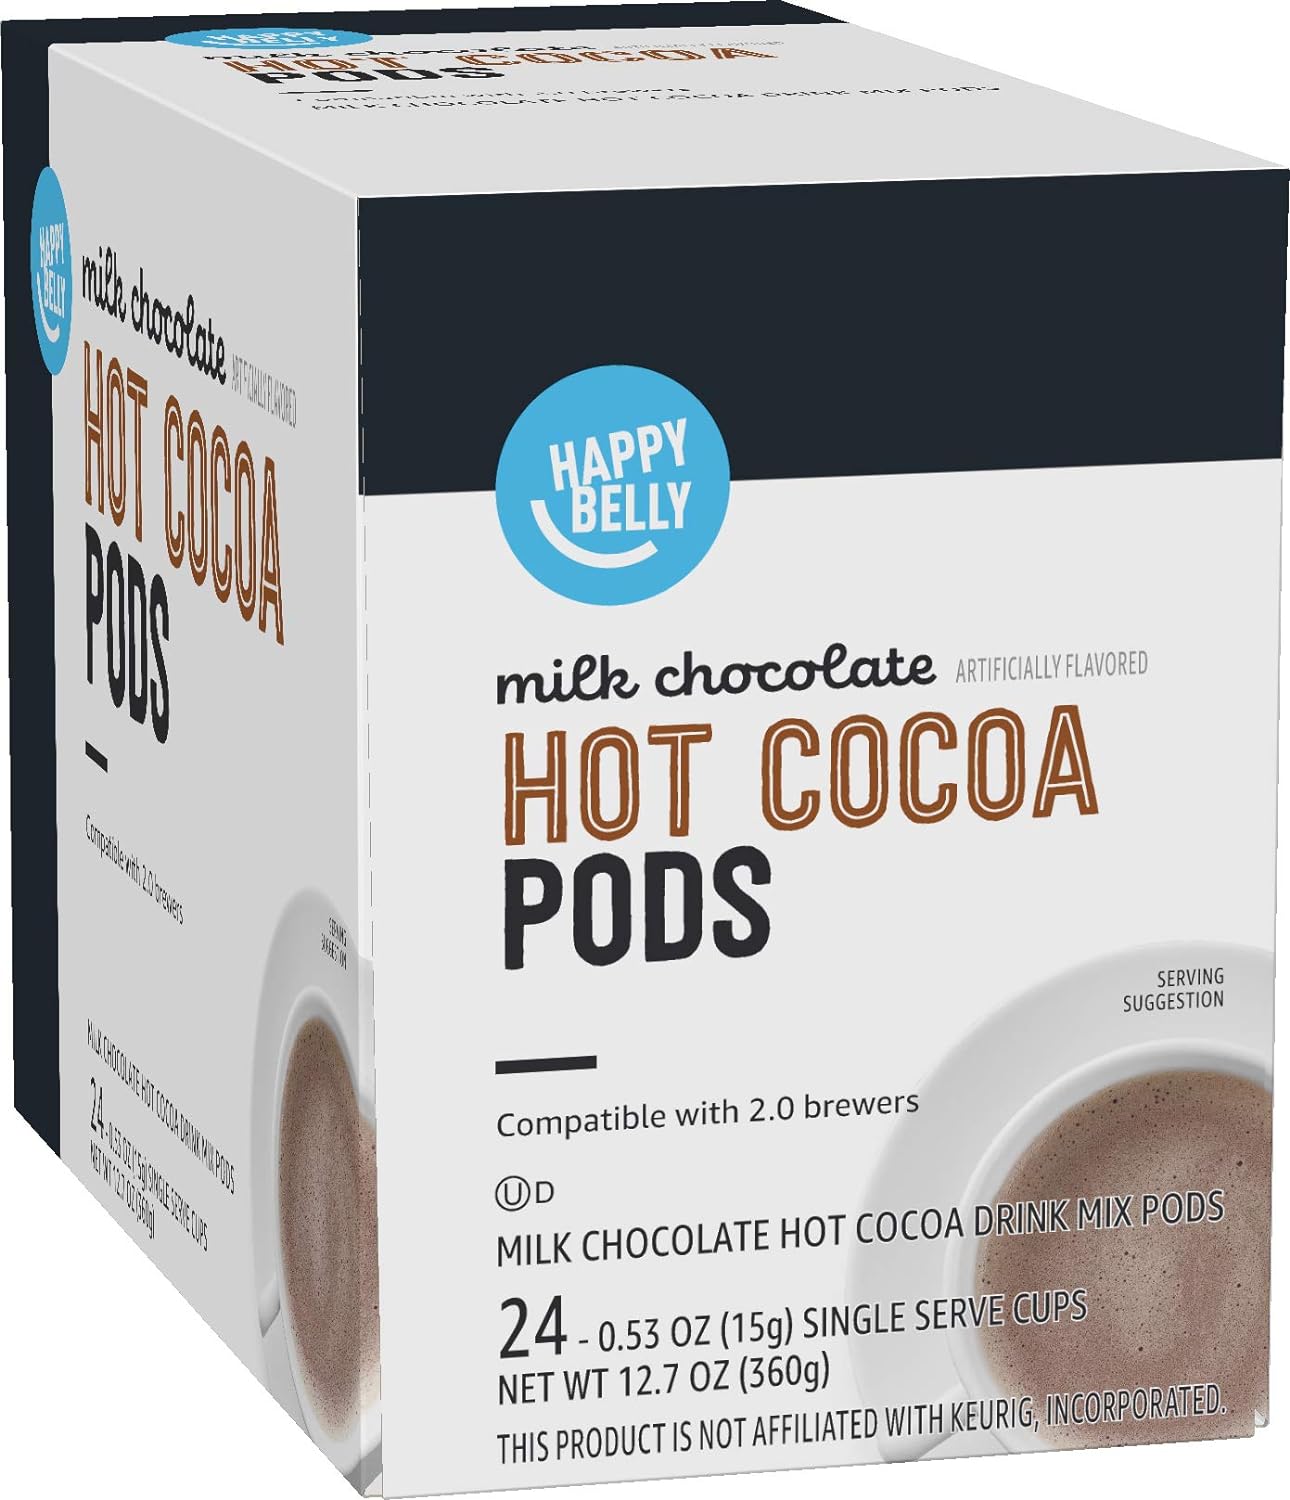 I just bought a kureg recently, and along with this pack of hot coco pods i bought a variety pack, the variety pack had all different brands of hot coco, and after trying them all i have to say amazon does it best! the issue with other coco pods is it kinda tastes like water, since you cant put milk in your kureg, but amazon' coco is nice and strong so it isnt watered down! great for the price too.